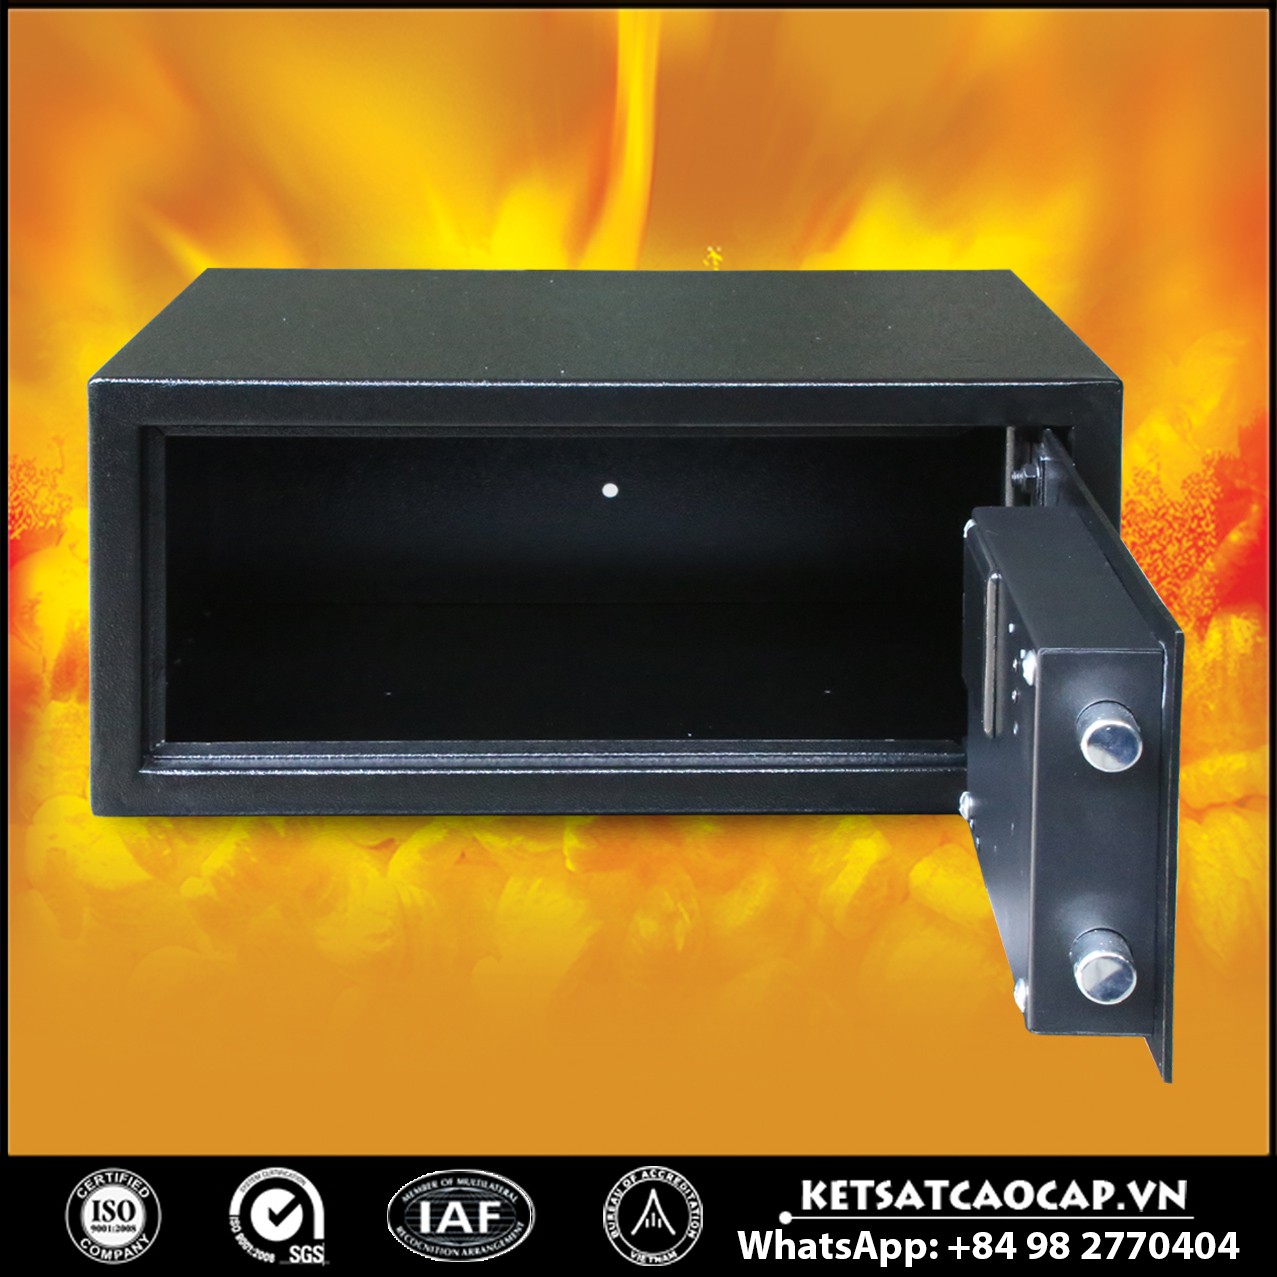 Buy Best Sellers In Hotel Safes Manufacturers & Suppliers‎, Safes For Hotels From Ireland's